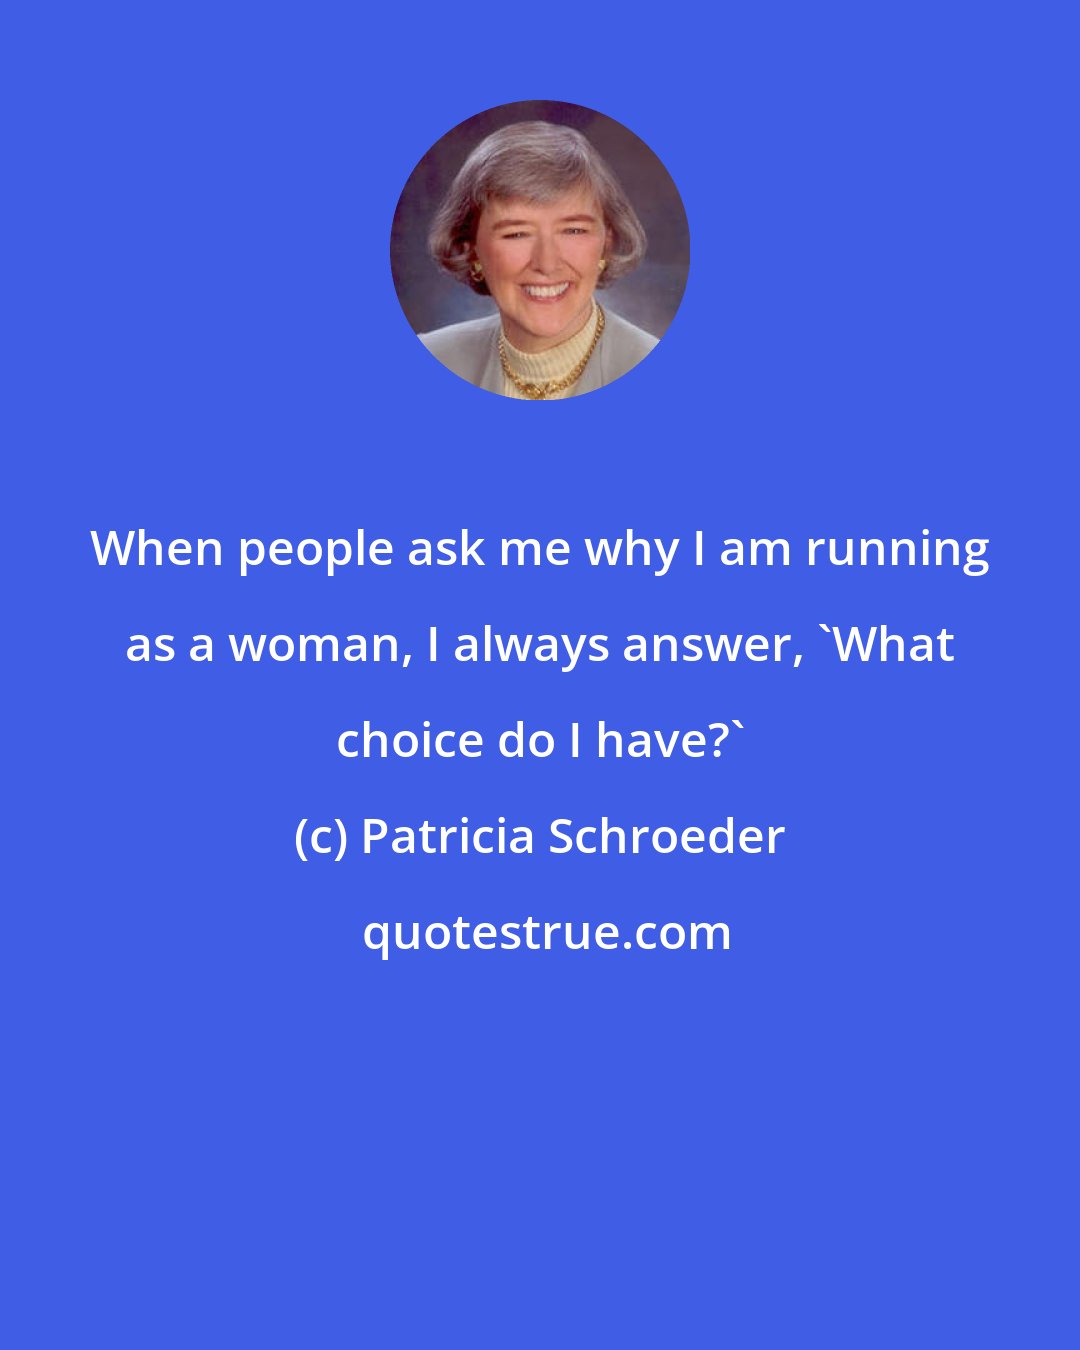 Patricia Schroeder: When people ask me why I am running as a woman, I always answer, 'What choice do I have?'